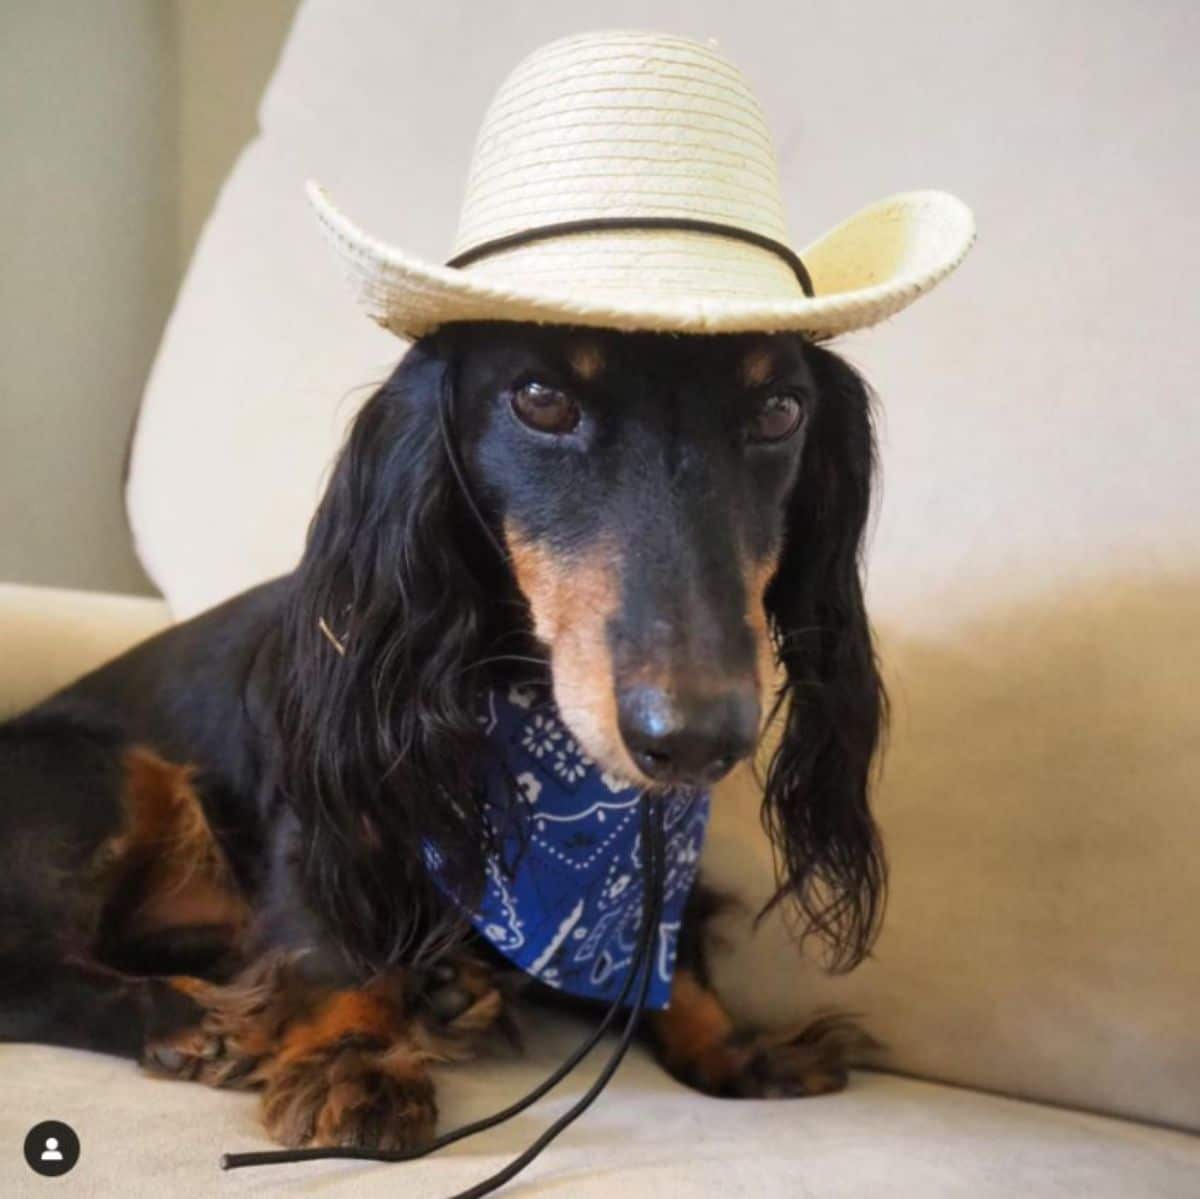 old black and brown dachshund on a white sofa wearing a blue and white bandana and a straw cowboy hat with a black band